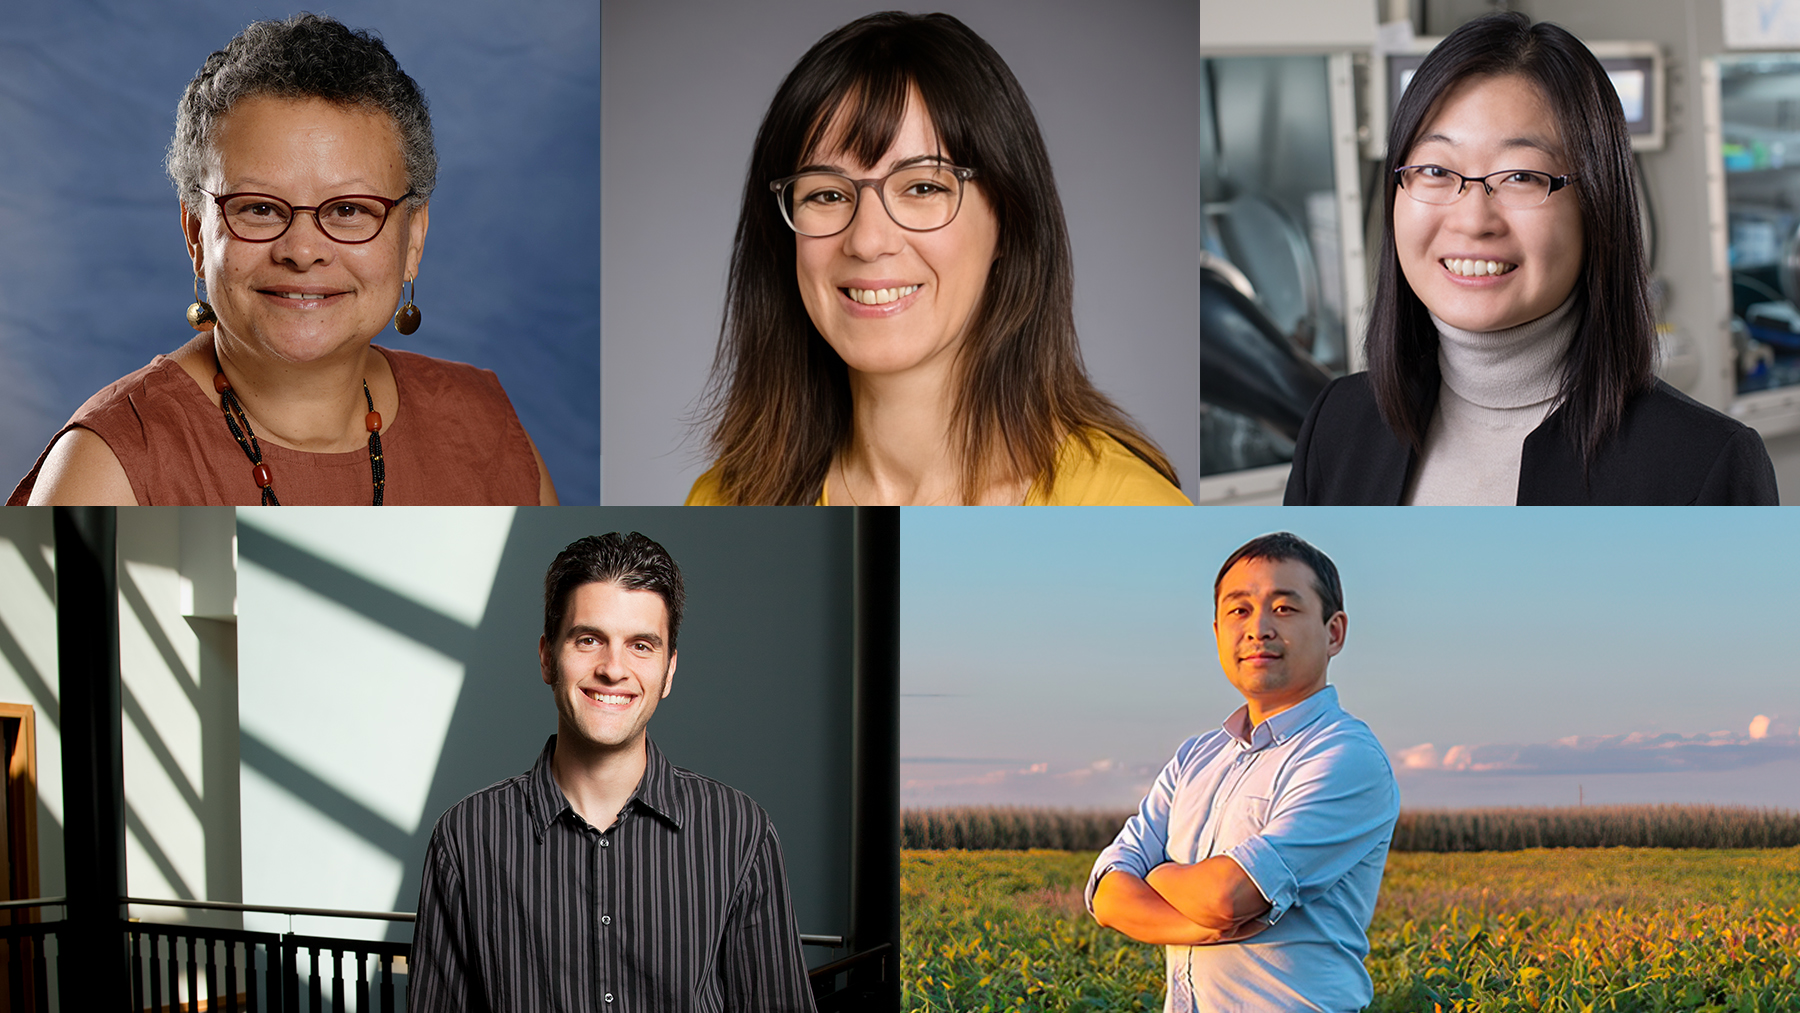 Five University of Illinois Urbana-Champaign professors have been named University Scholars. Top, from left to right: Merle Bowen, African American studies; Cecilia Leal, materials science and engineering; and Ying Diao, chemical and biomolecular engineering. Bottom row, left to right: Brian Ogolsky, human development and family studies; and Kaiyu Guan, natural resources and environmental studies  Bowen photo by Della Perrone; Leal, Diao and Ogolsky by L. Brian Stauffer; and Kaiyu Guan by Chris Brown Photography, courtesy of NCSA.